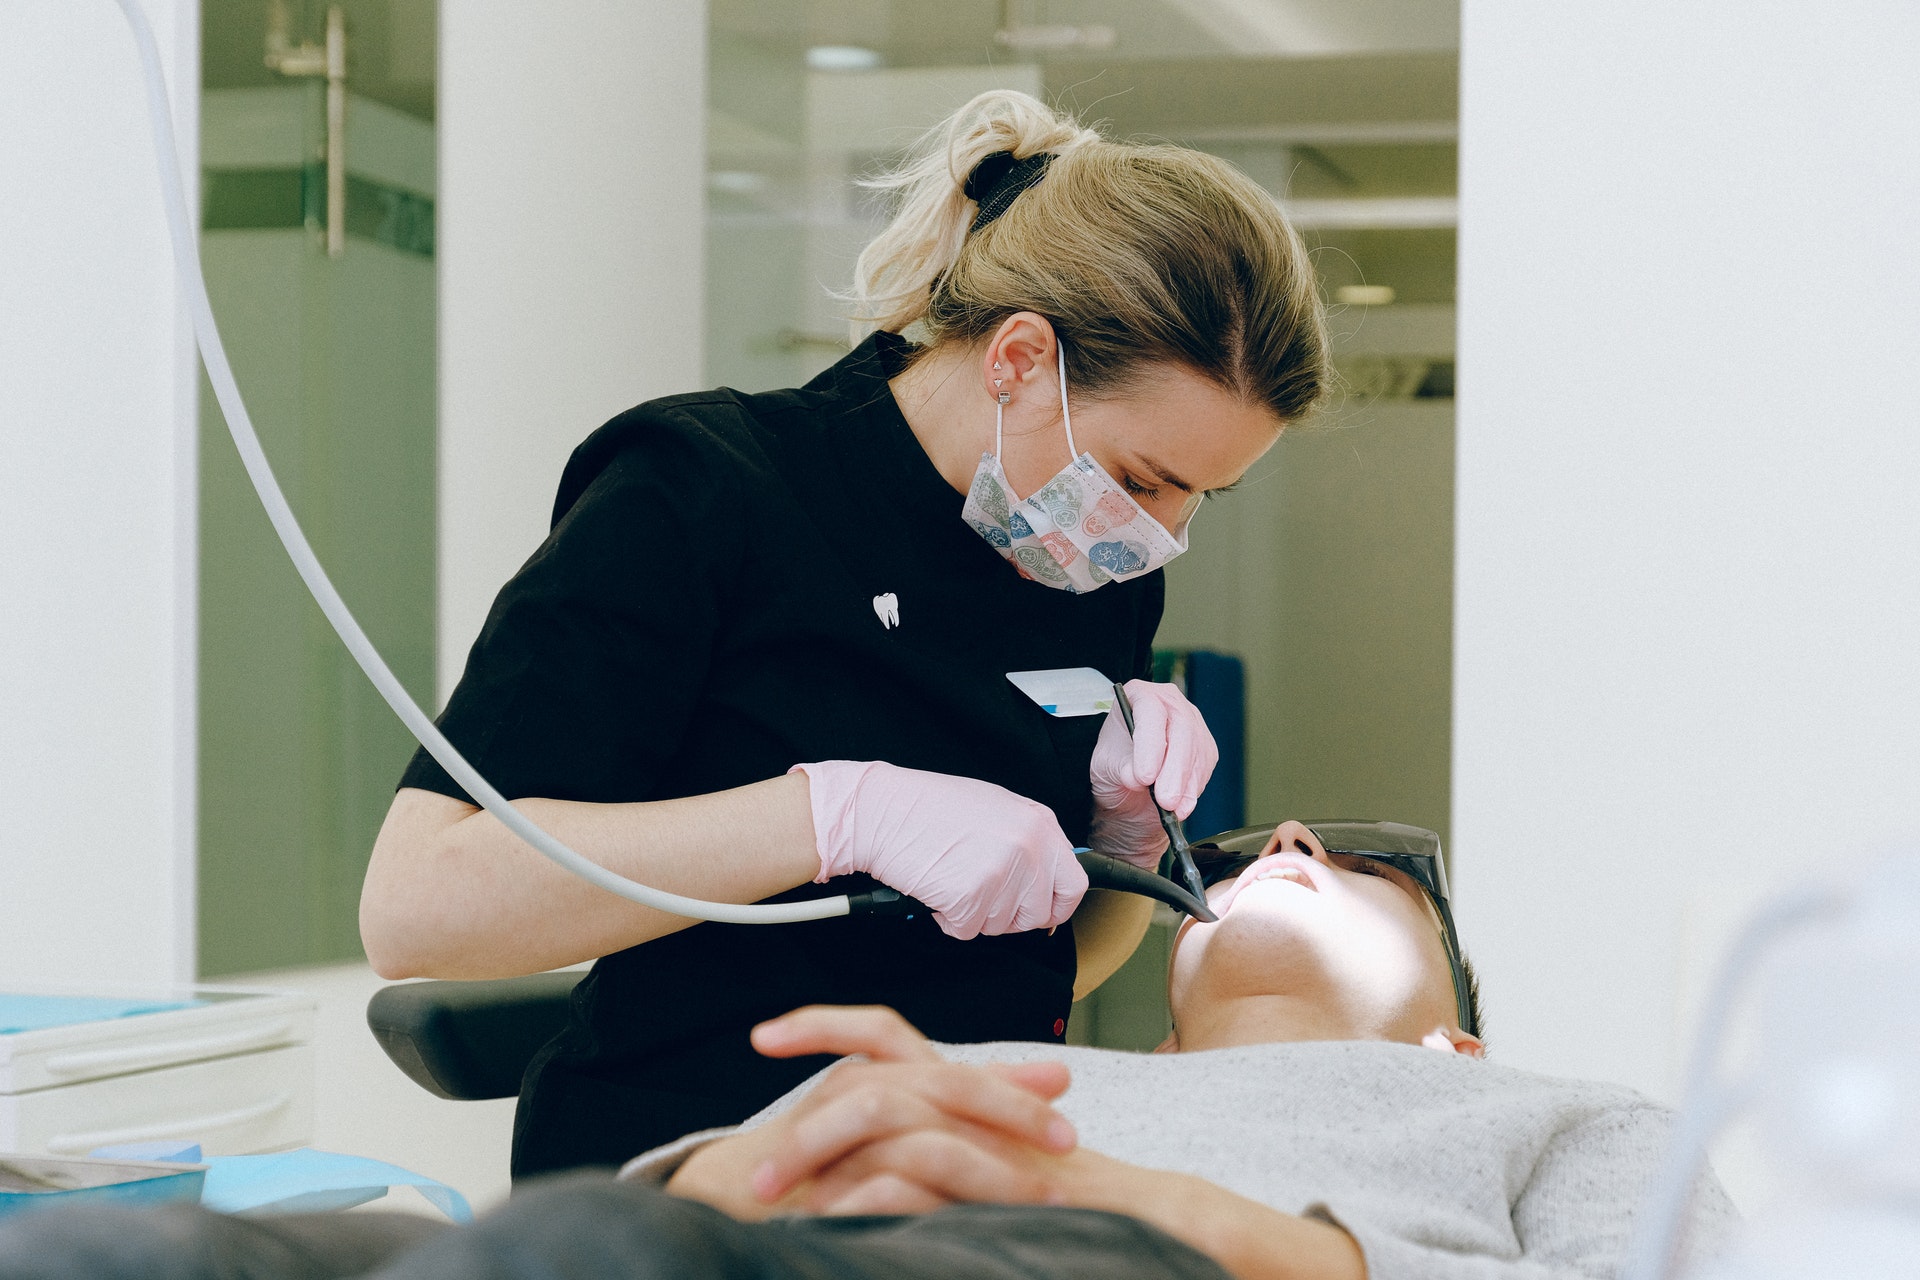 Sedation Dentistry: What Is It and Who Provides It?